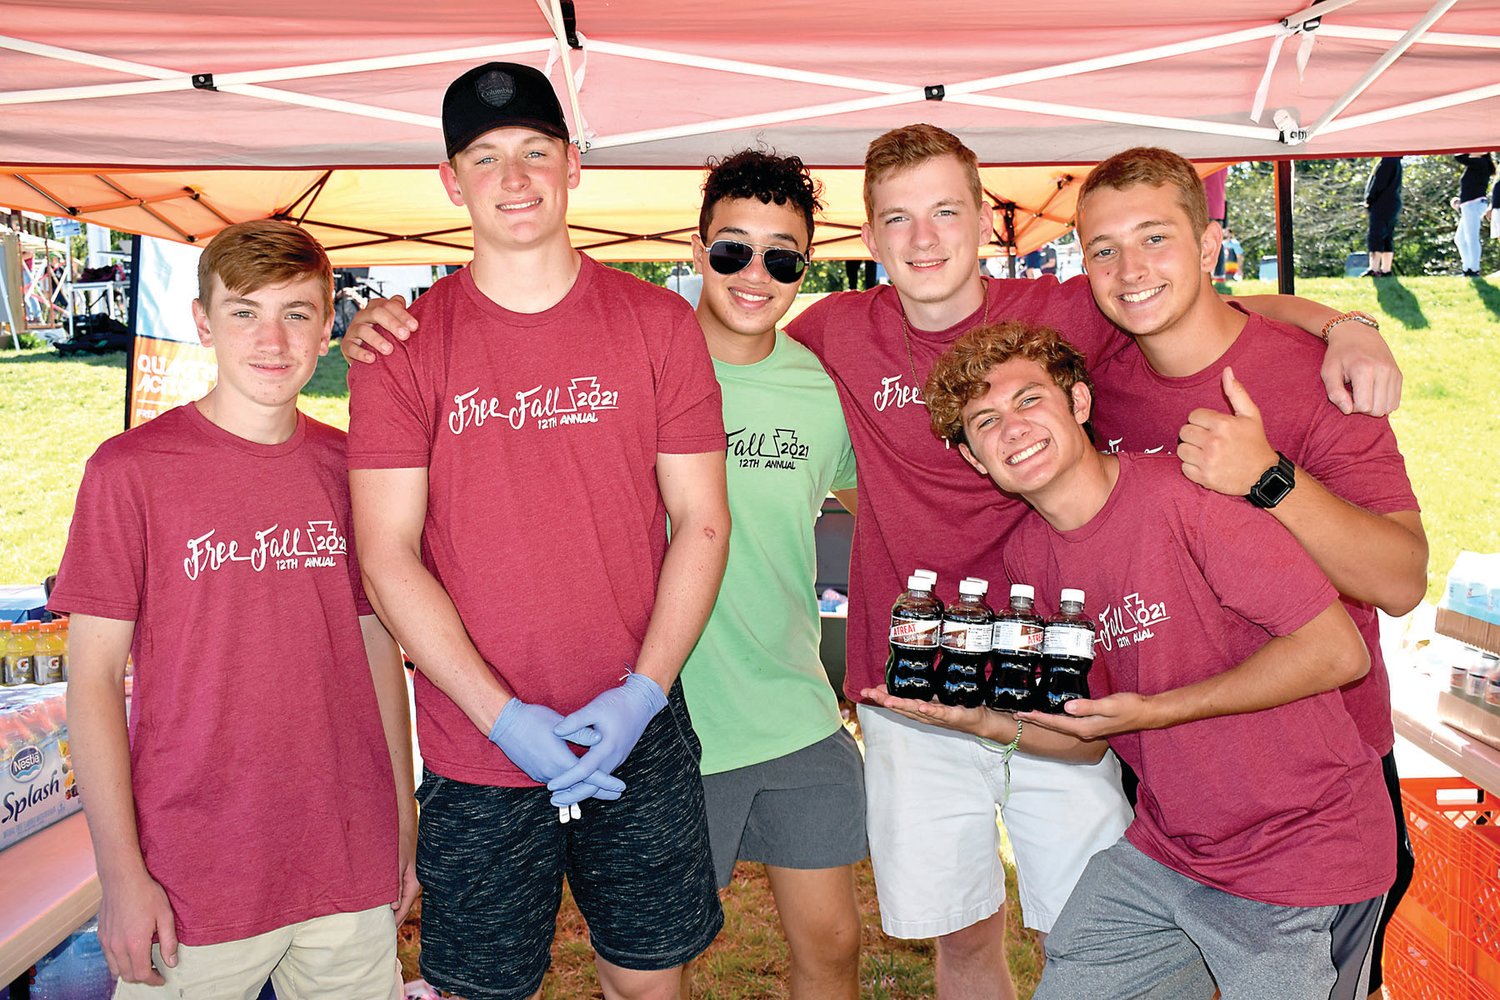 The drink crew: Zane Smith, Sean O’Donnell, Mason Kineen, Cian Brownlee, Mitch Landes and Evan Ratshmy.